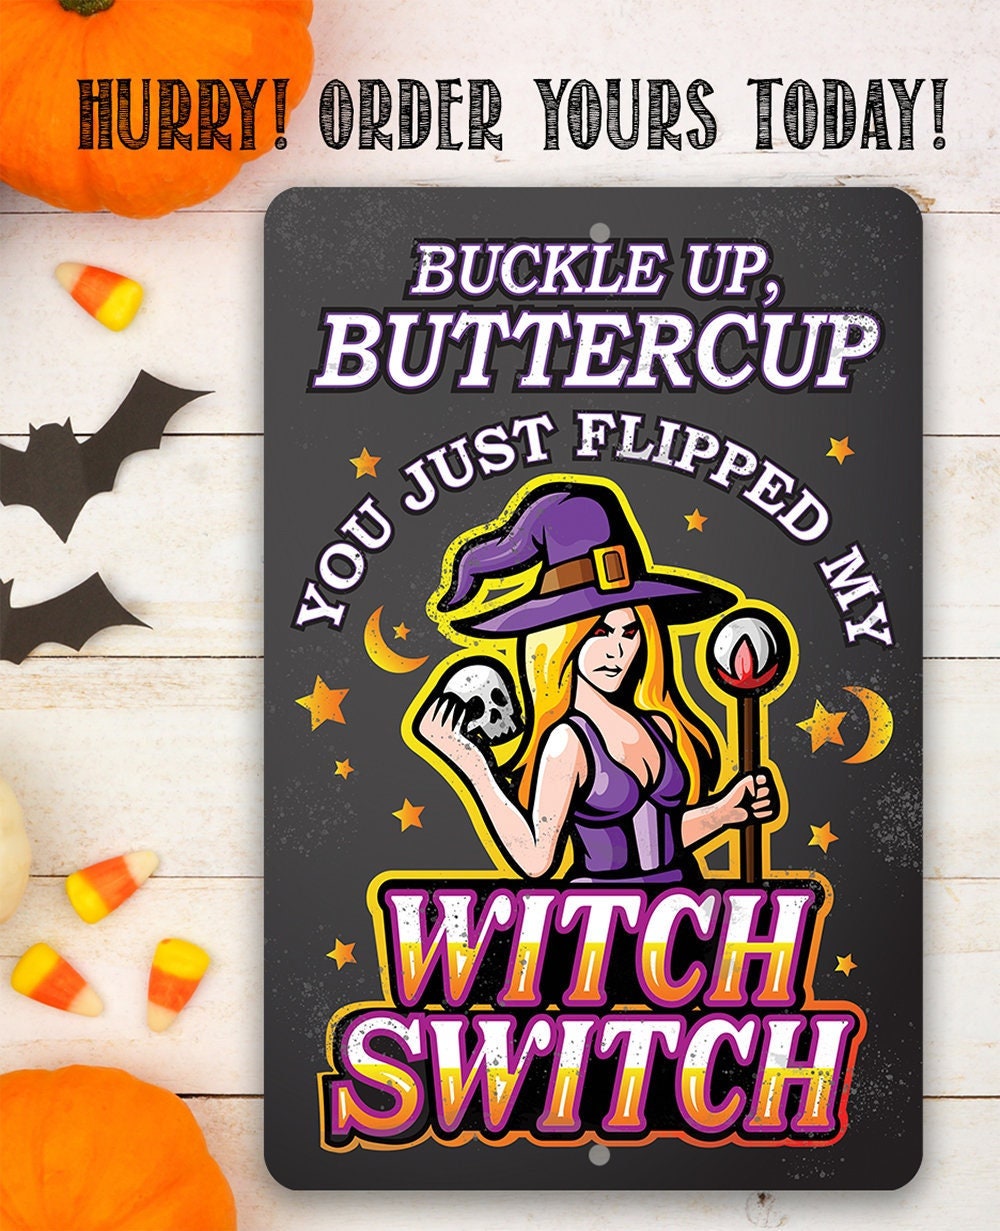 Buckle Up, Buttercup Witch Switch - Metal Sign Metal Sign Lone Star Art 